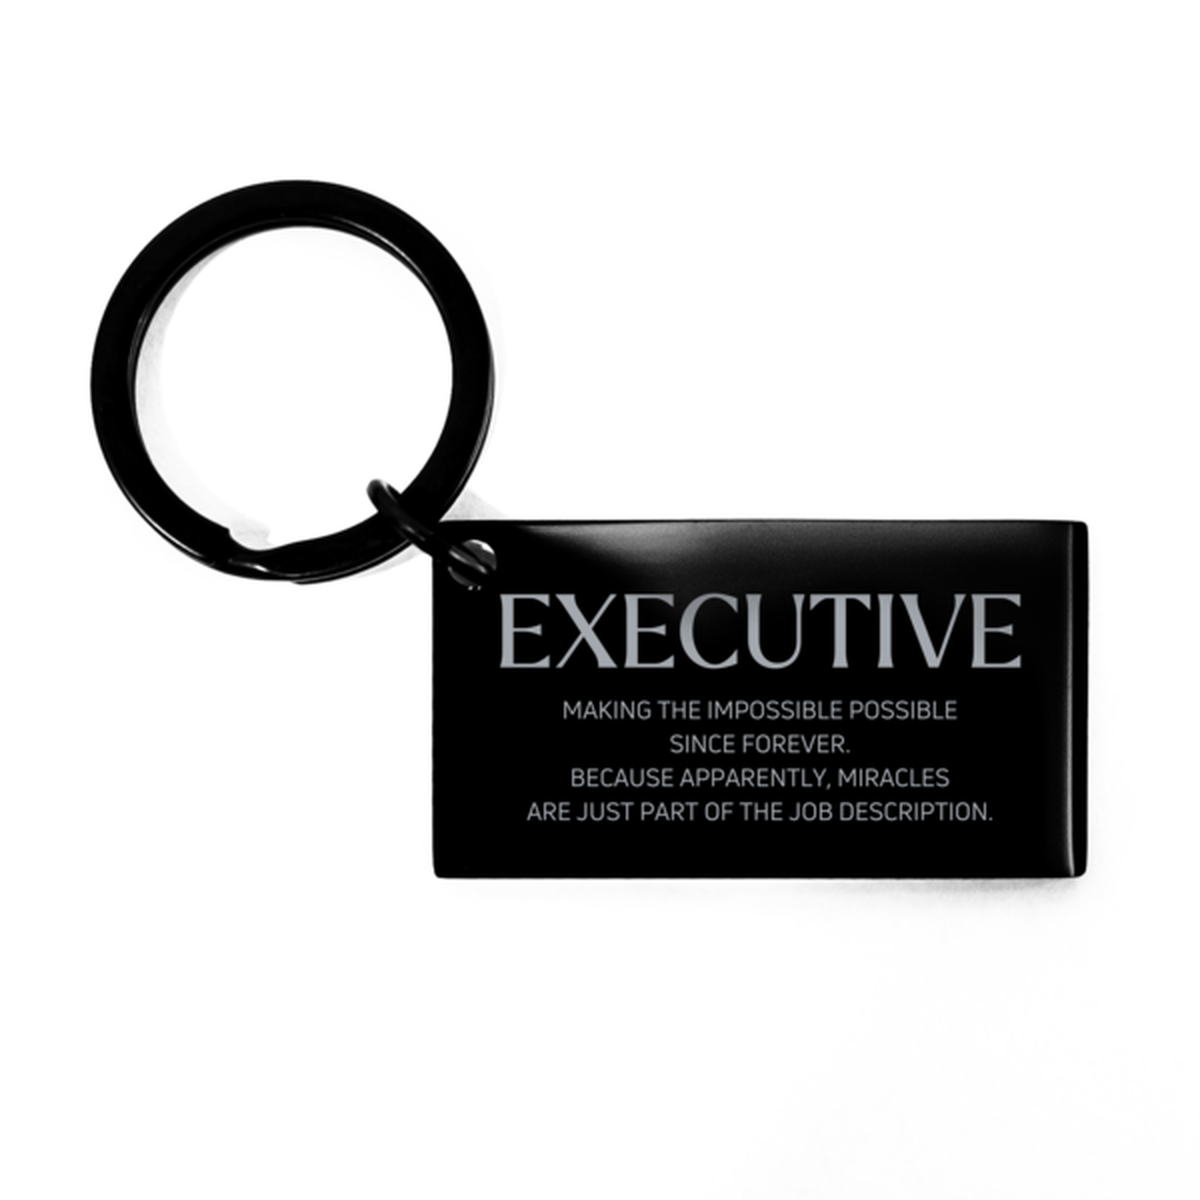 Funny Executive Gifts, Miracles are just part of the job description, Inspirational Birthday Keychain For Executive, Men, Women, Coworkers, Friends, Boss